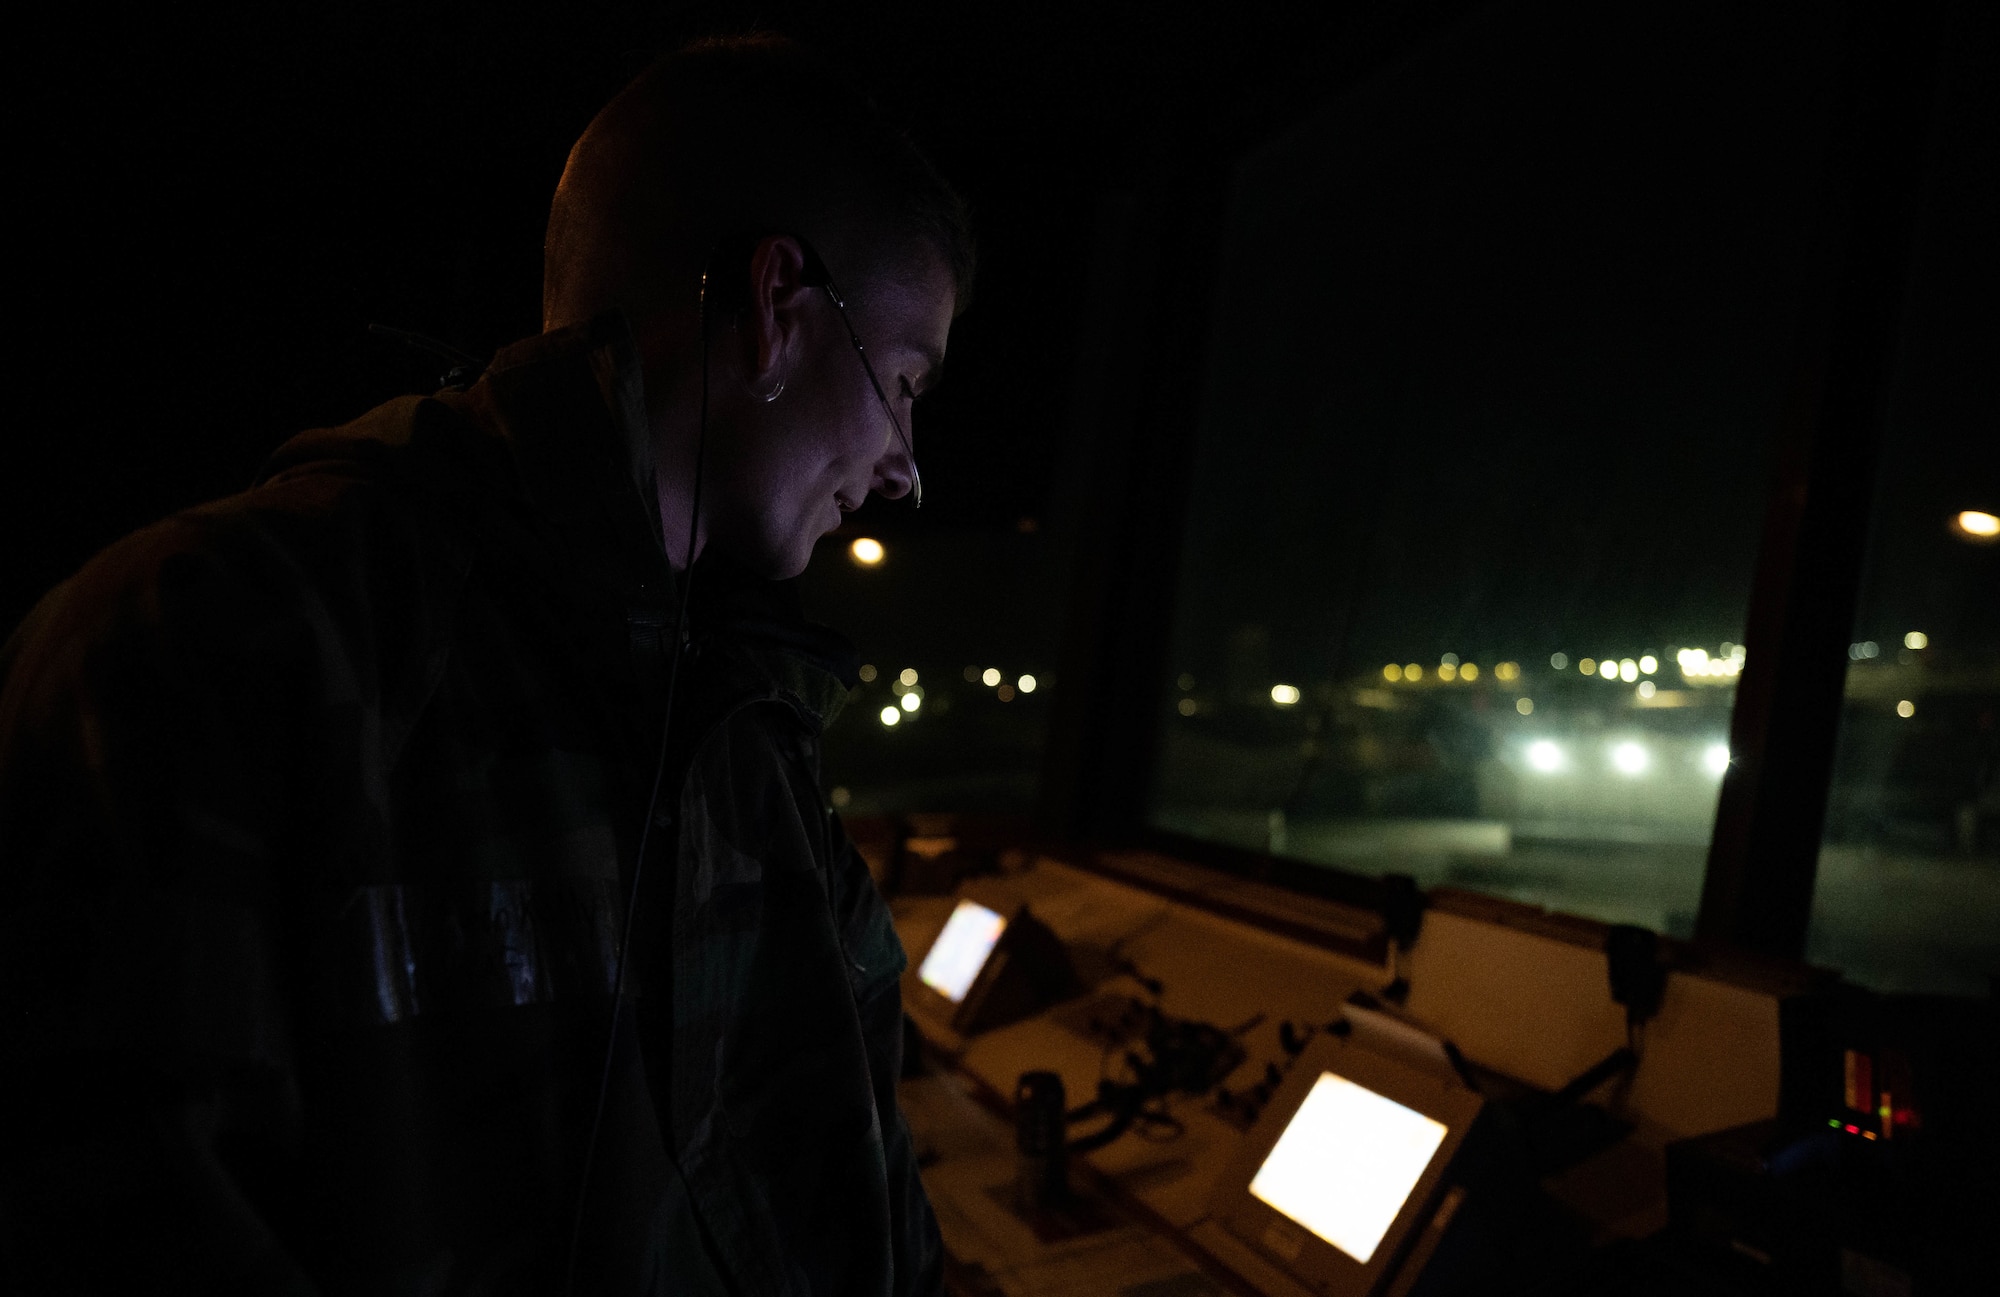 U.S. Air Force Senior Airman Shawn Kelly, 8th Operations Support Squadron air traffic controller, monitors a terminal at Kunsan Air Base, Republic of Korea, Nov. 3, 2022. Air traffic controllers are responsible for monitoring and directing all aspects of flight within the Kunsan AB airspace. (U.S. Air Force photo by Senior Airman Shannon Braaten)